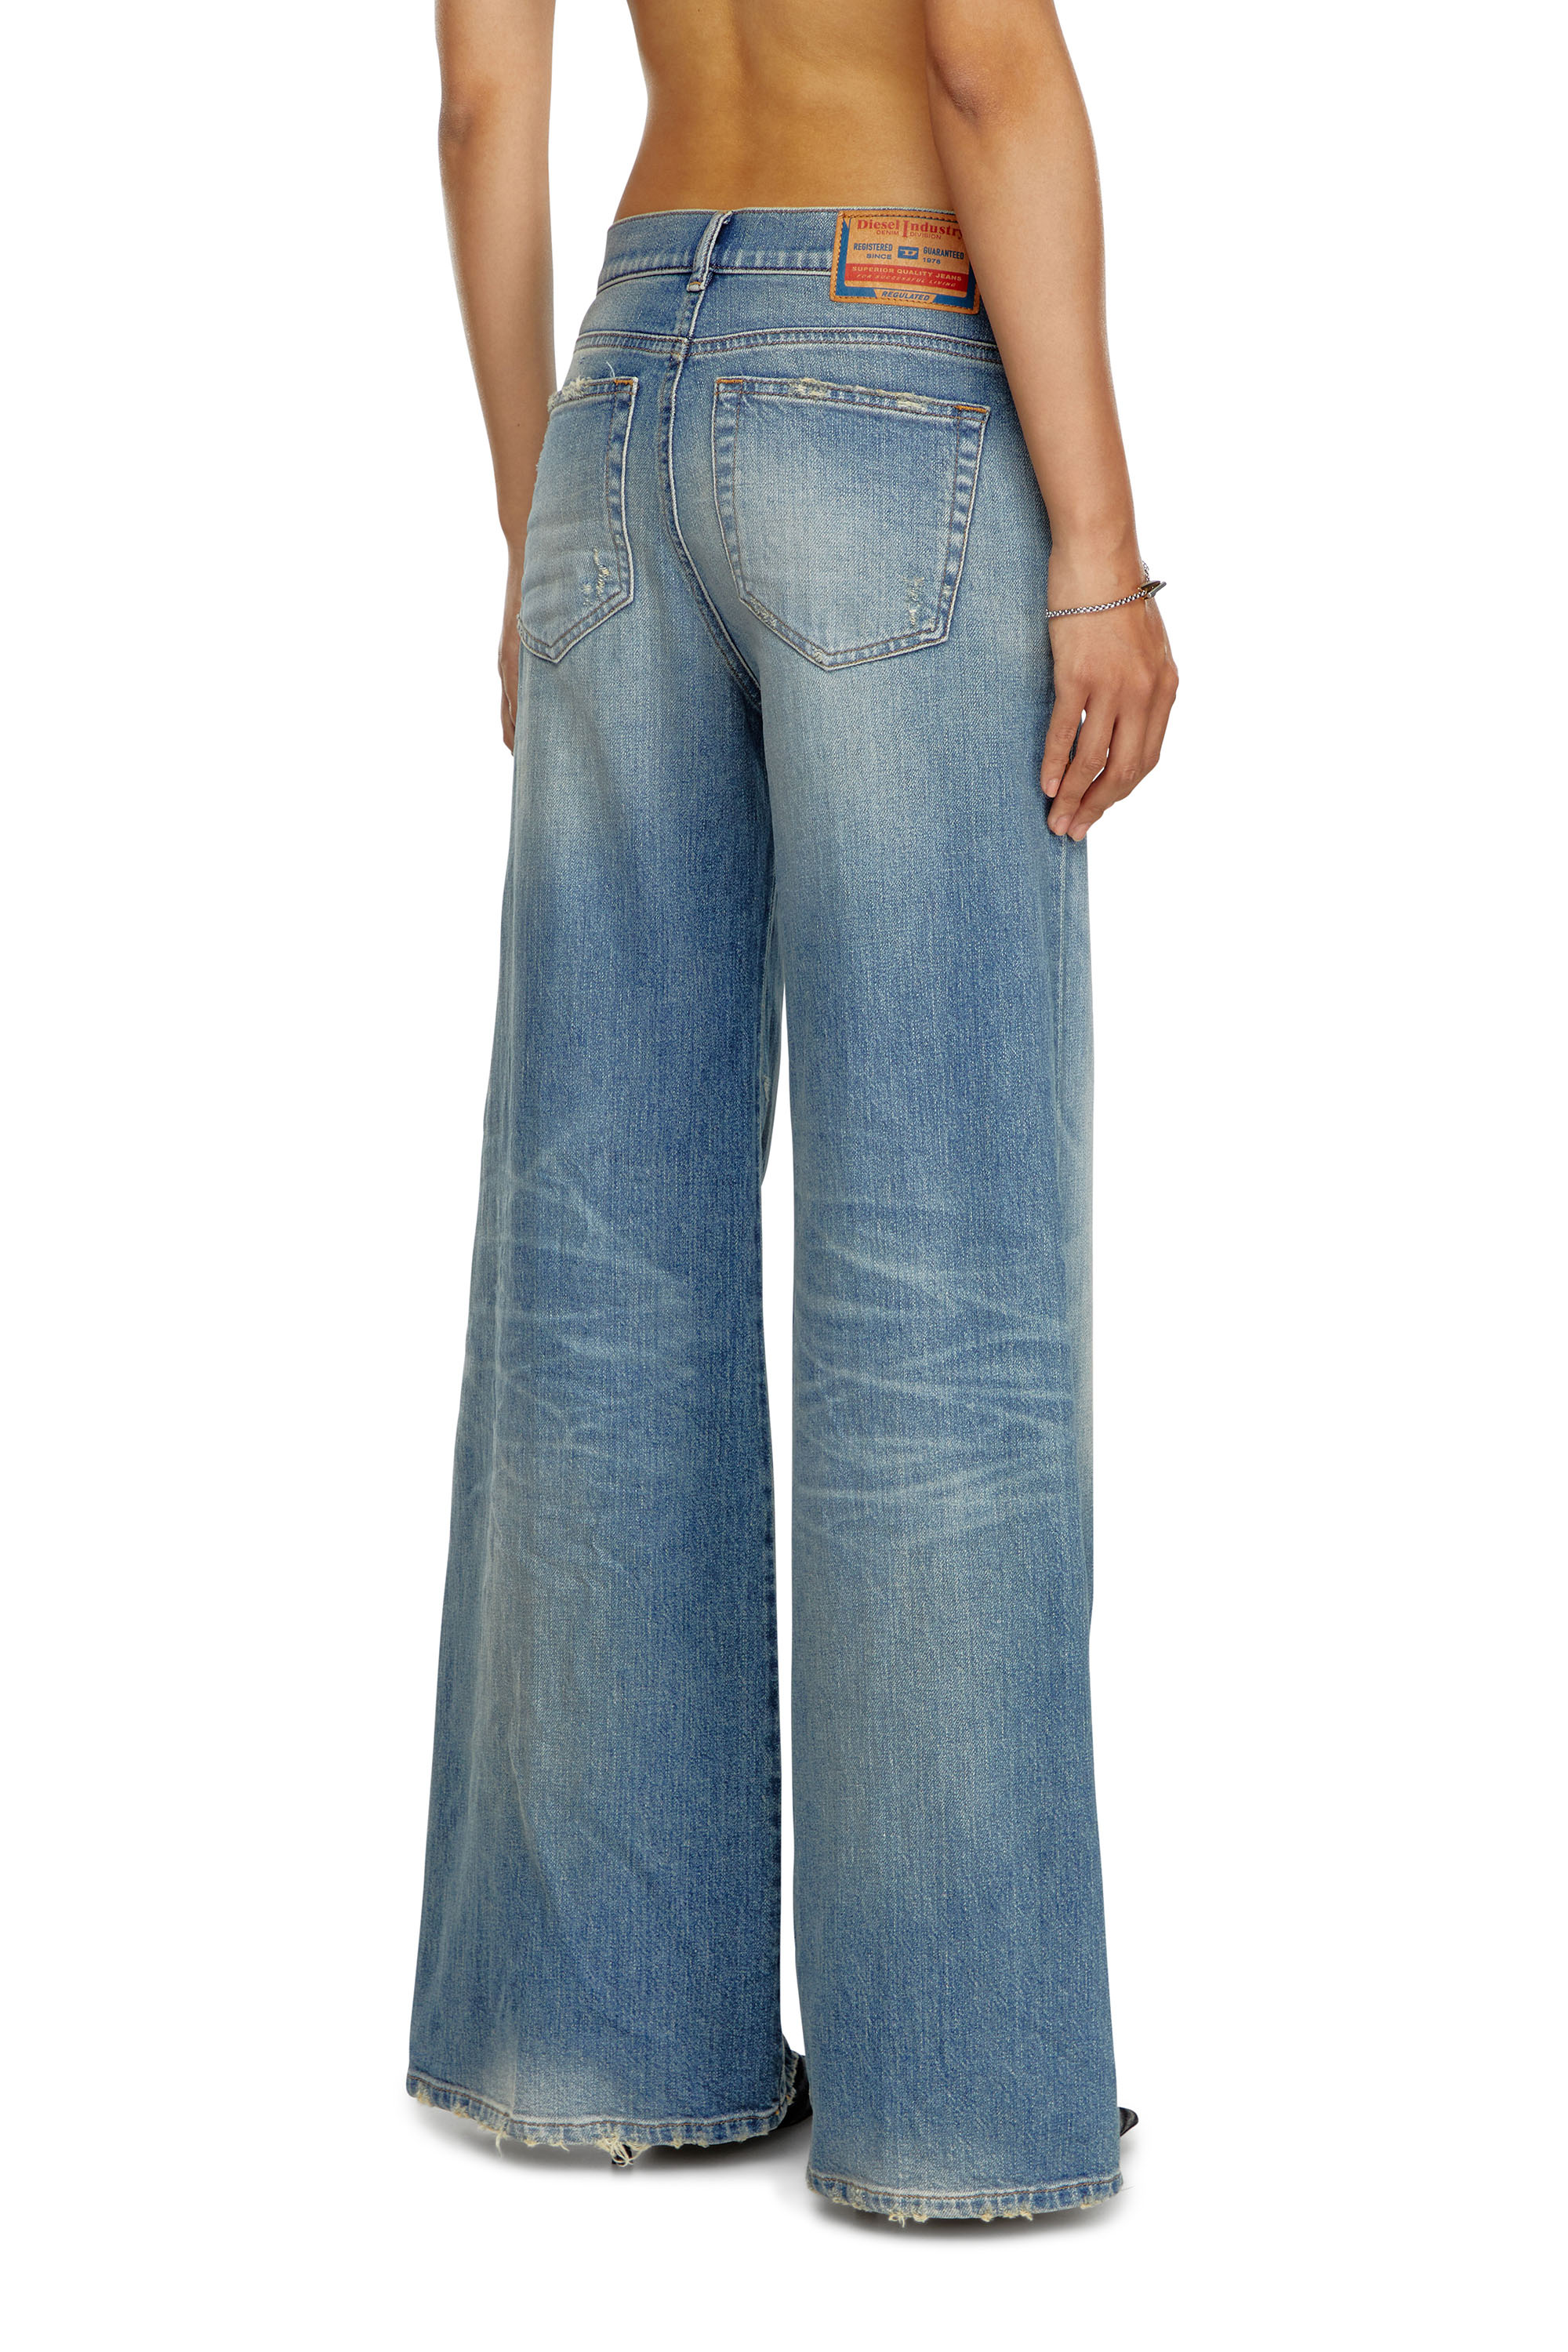 Diesel - Bootcut and Flare Jeans 1978 D-Akemi 09J44, Mujer Bootcut y Flare Jeans - 1978 D-Akemi in Azul marino - Image 4